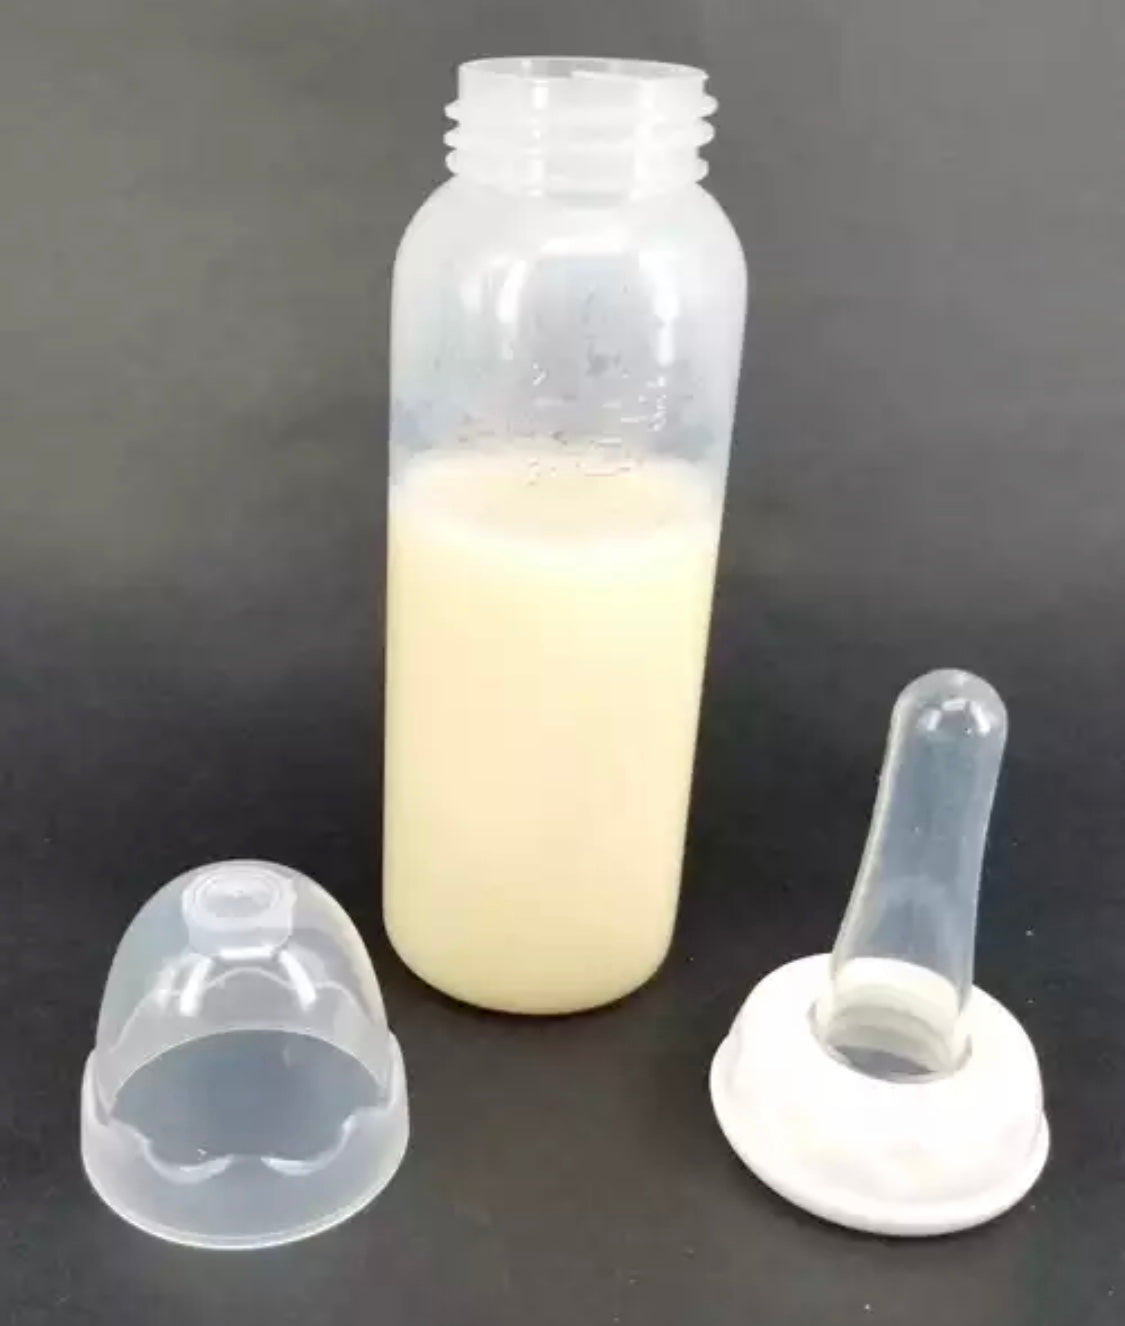 DDLGVERSE adult sized baby bottle with teat and white cap